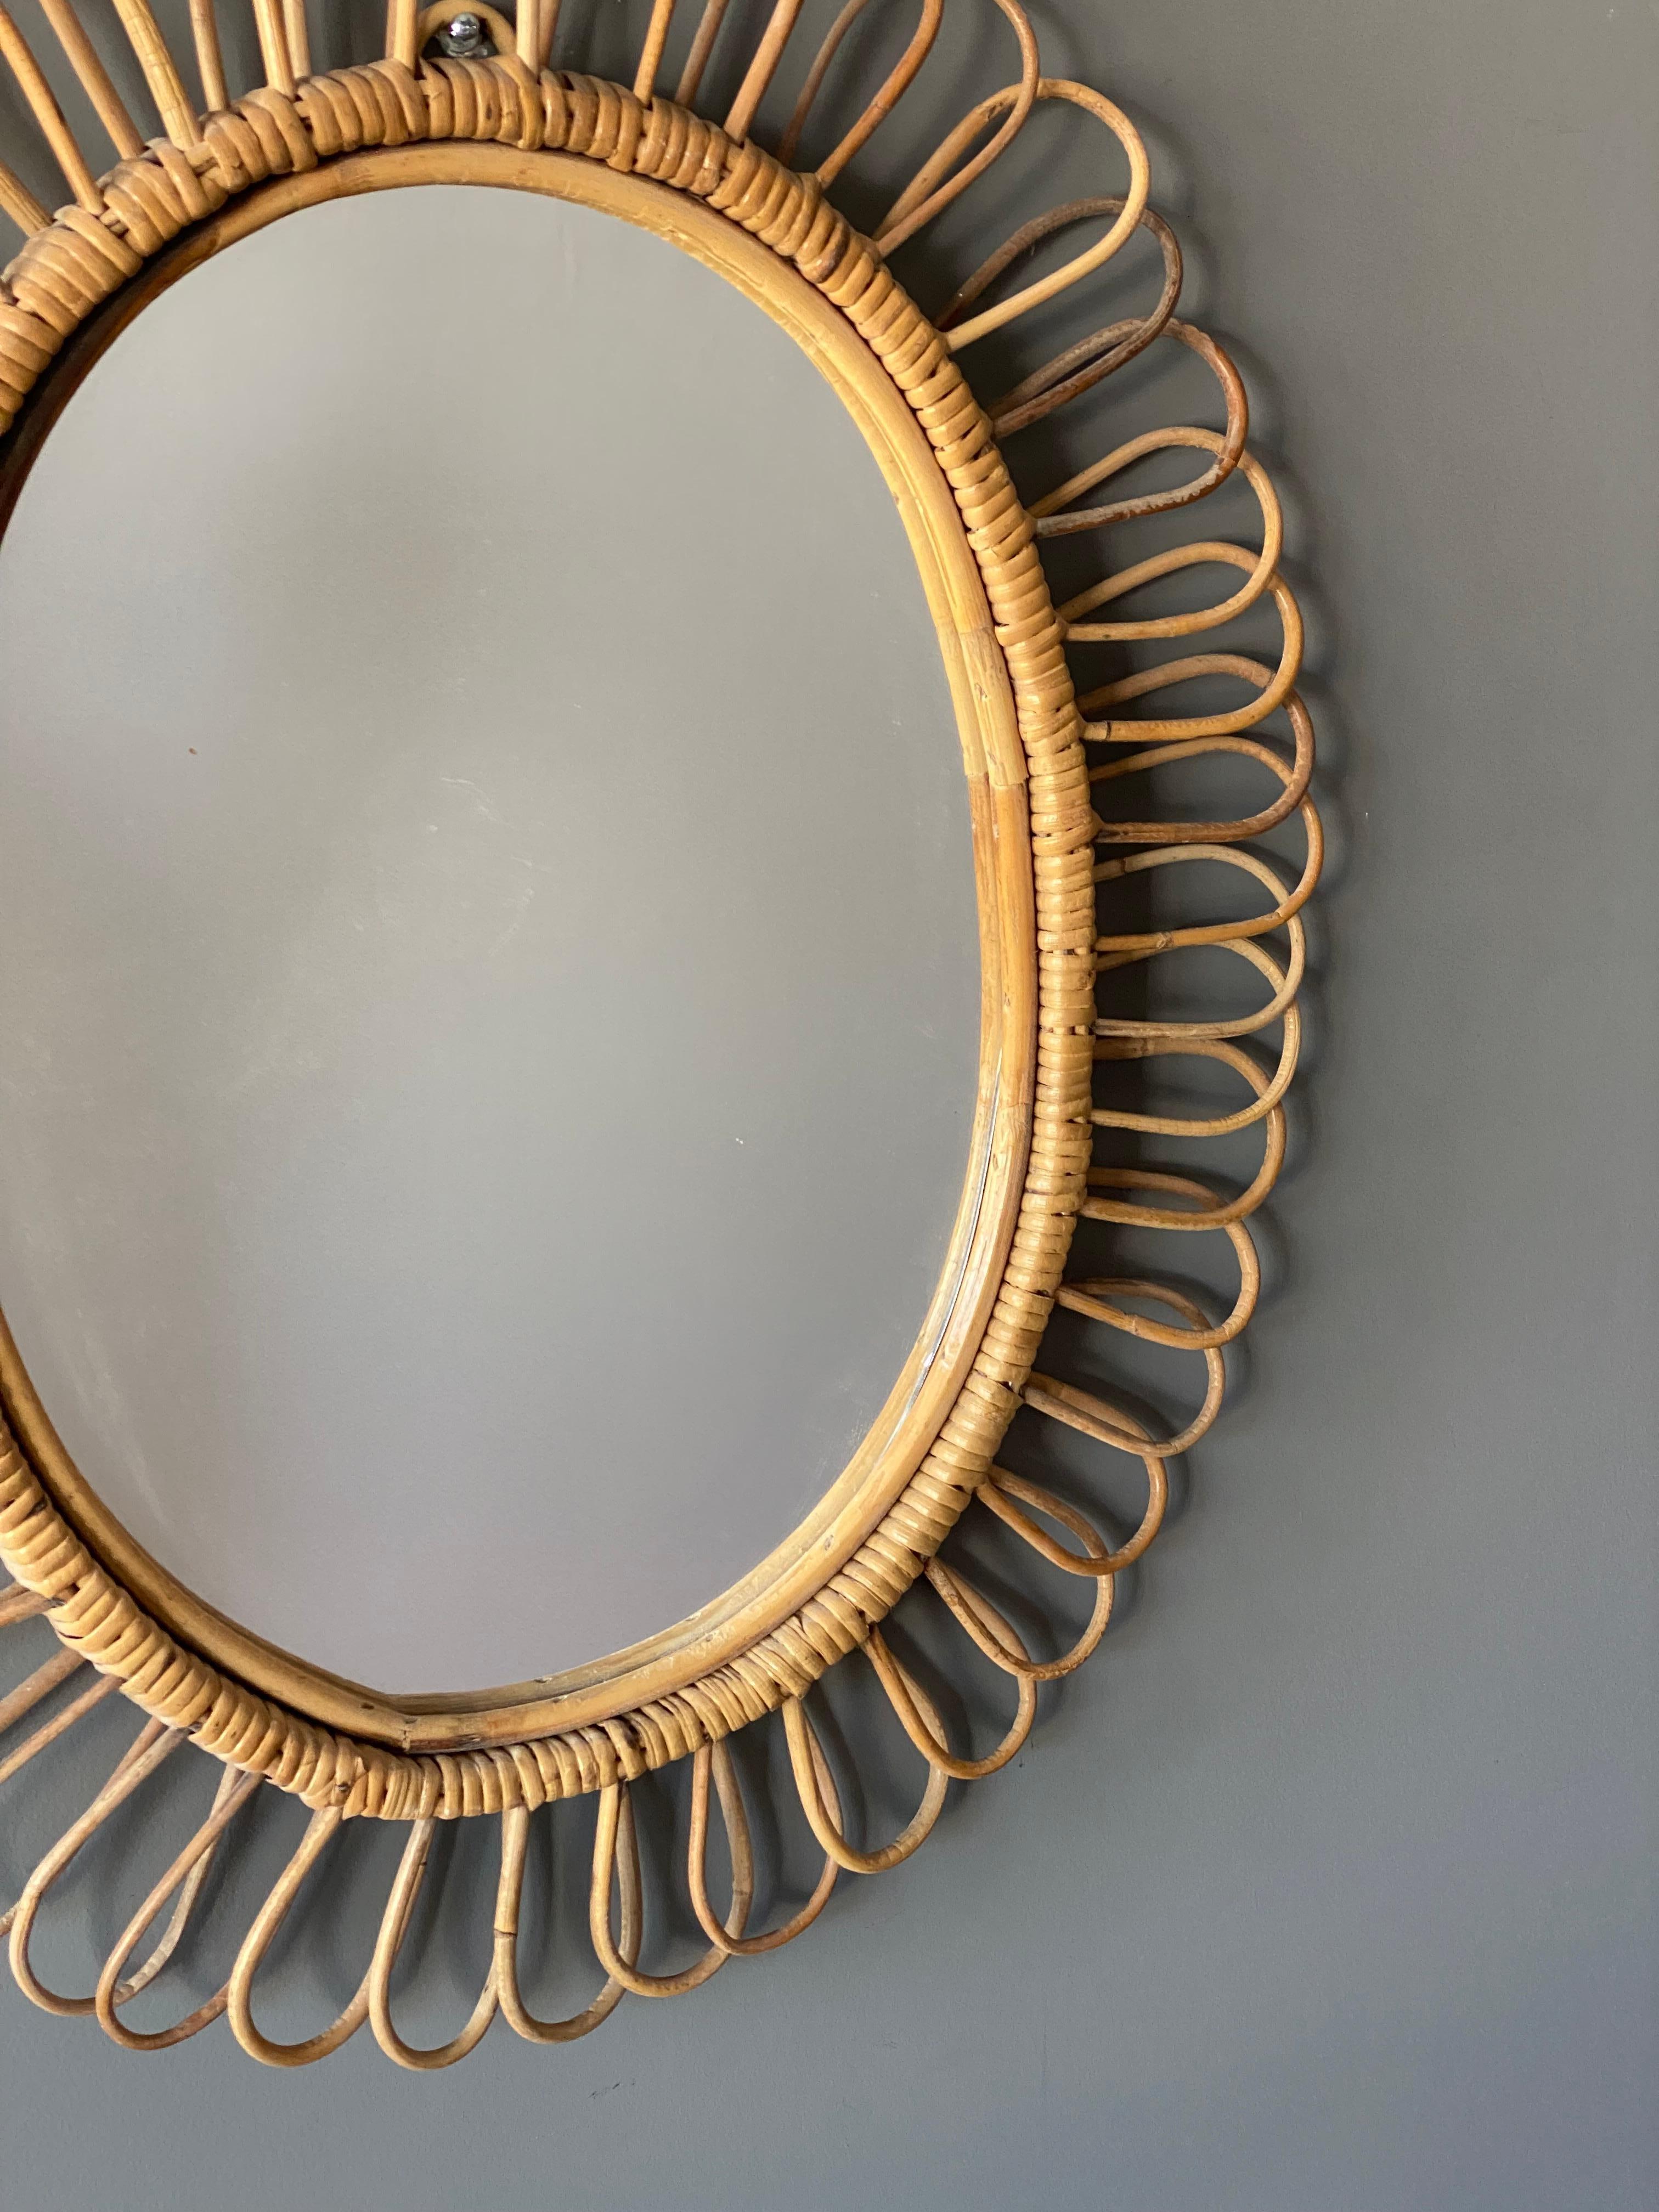 A wall mirror, produced in Italy, 1950s. Cut mirror glass is framed in bamboo and rattan.

 